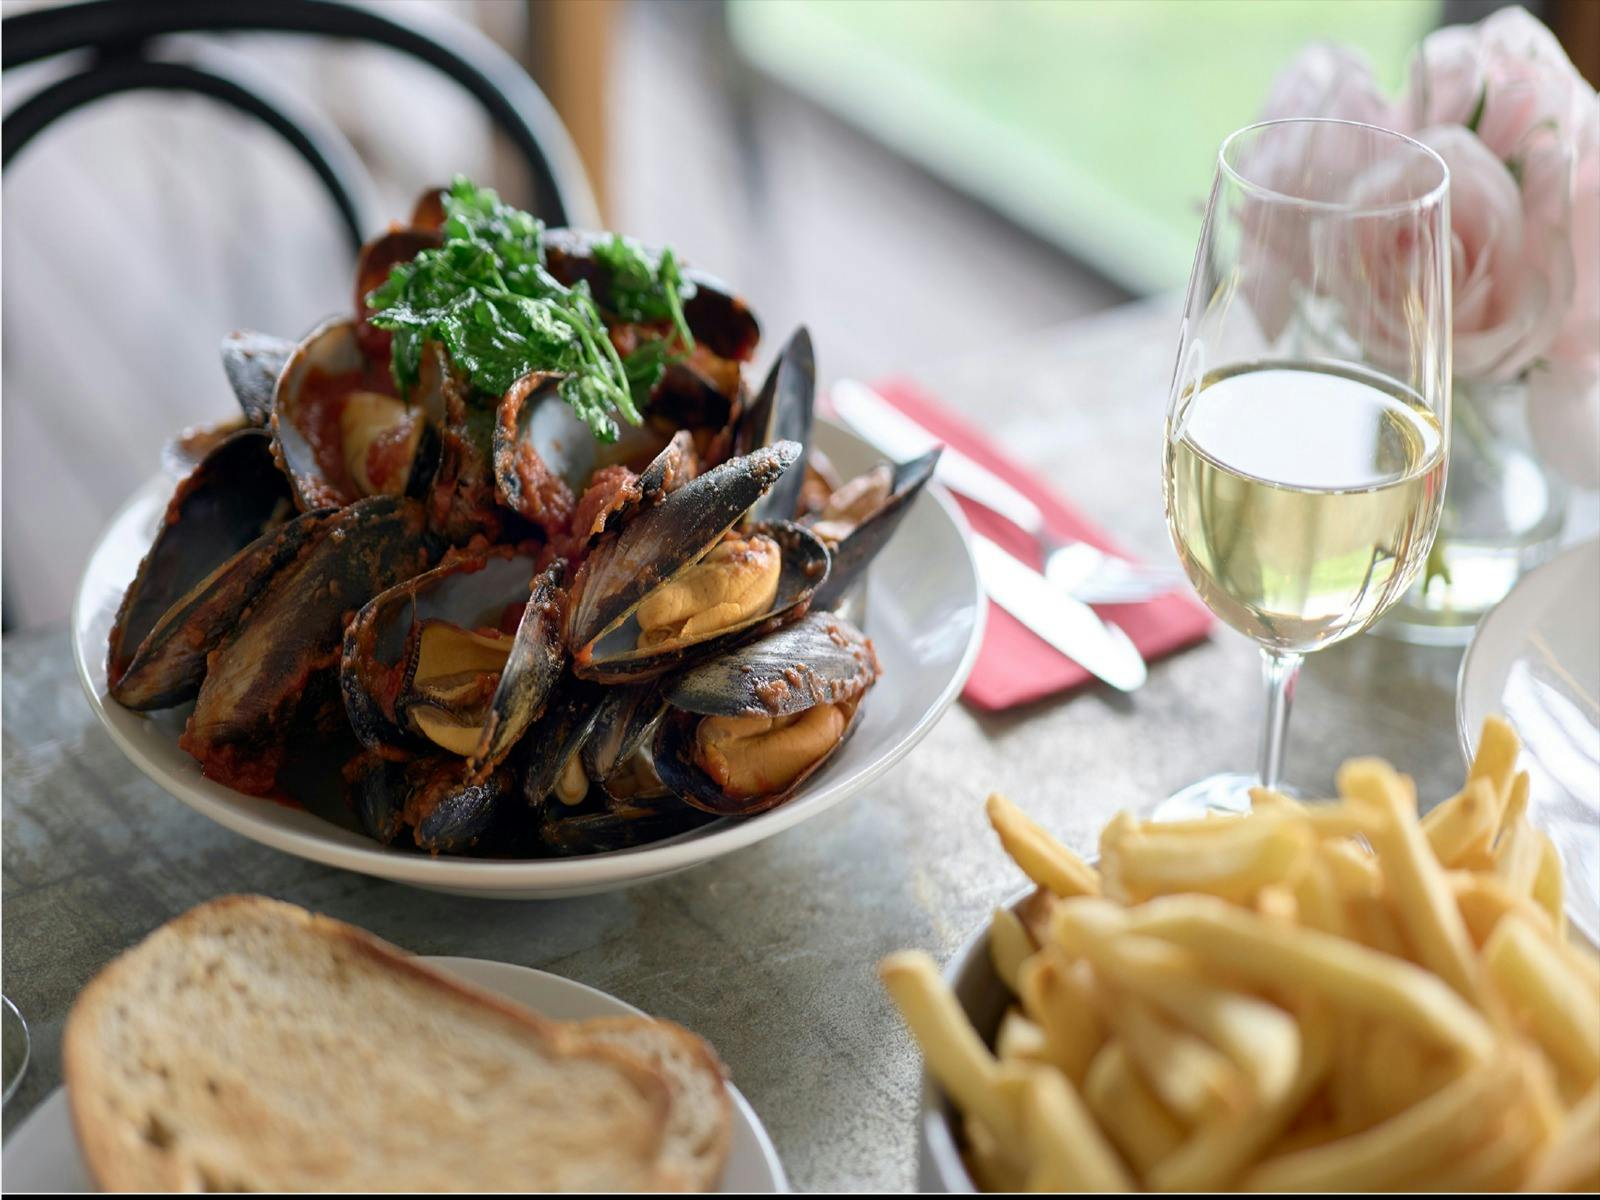 A bowl of mussels with a glass of wine on a timber table